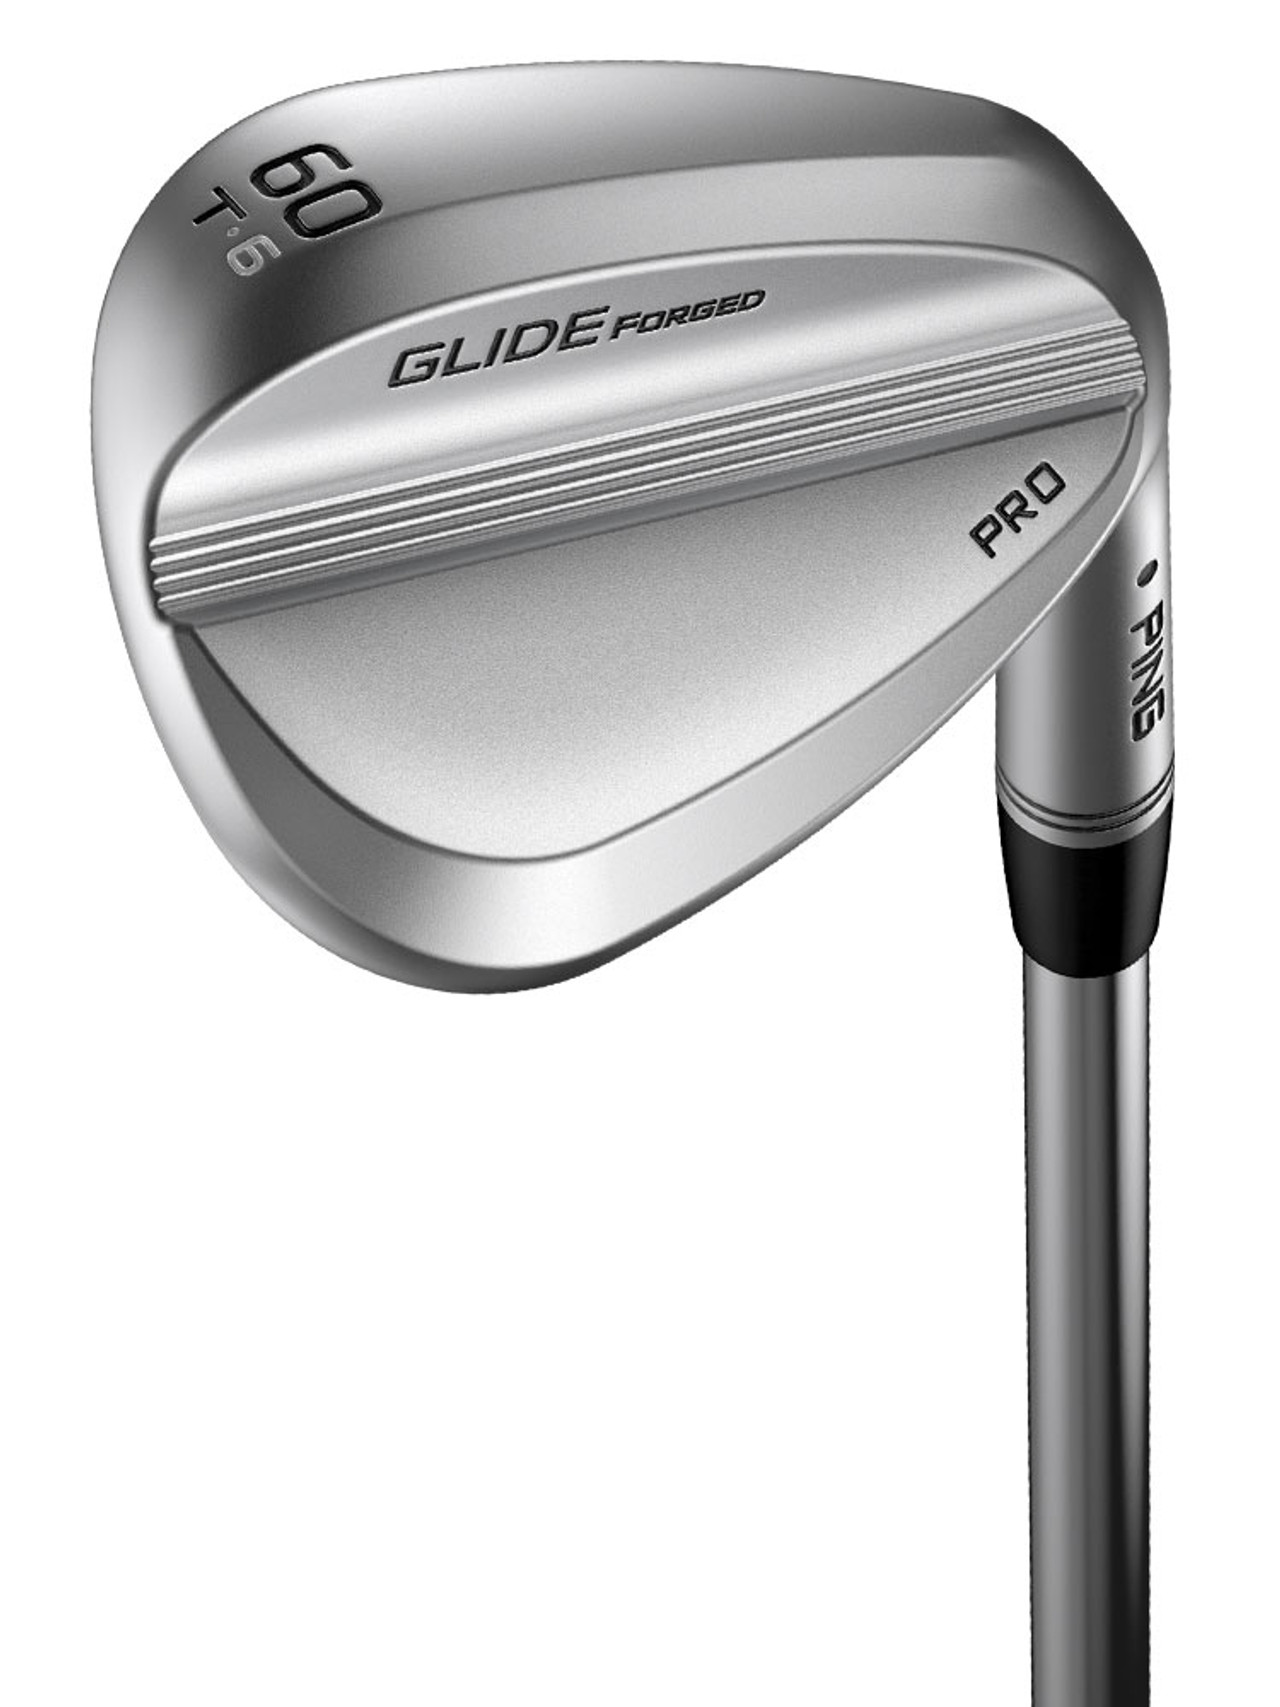 Ping Glide Forge Pro Wedge | GolfBox